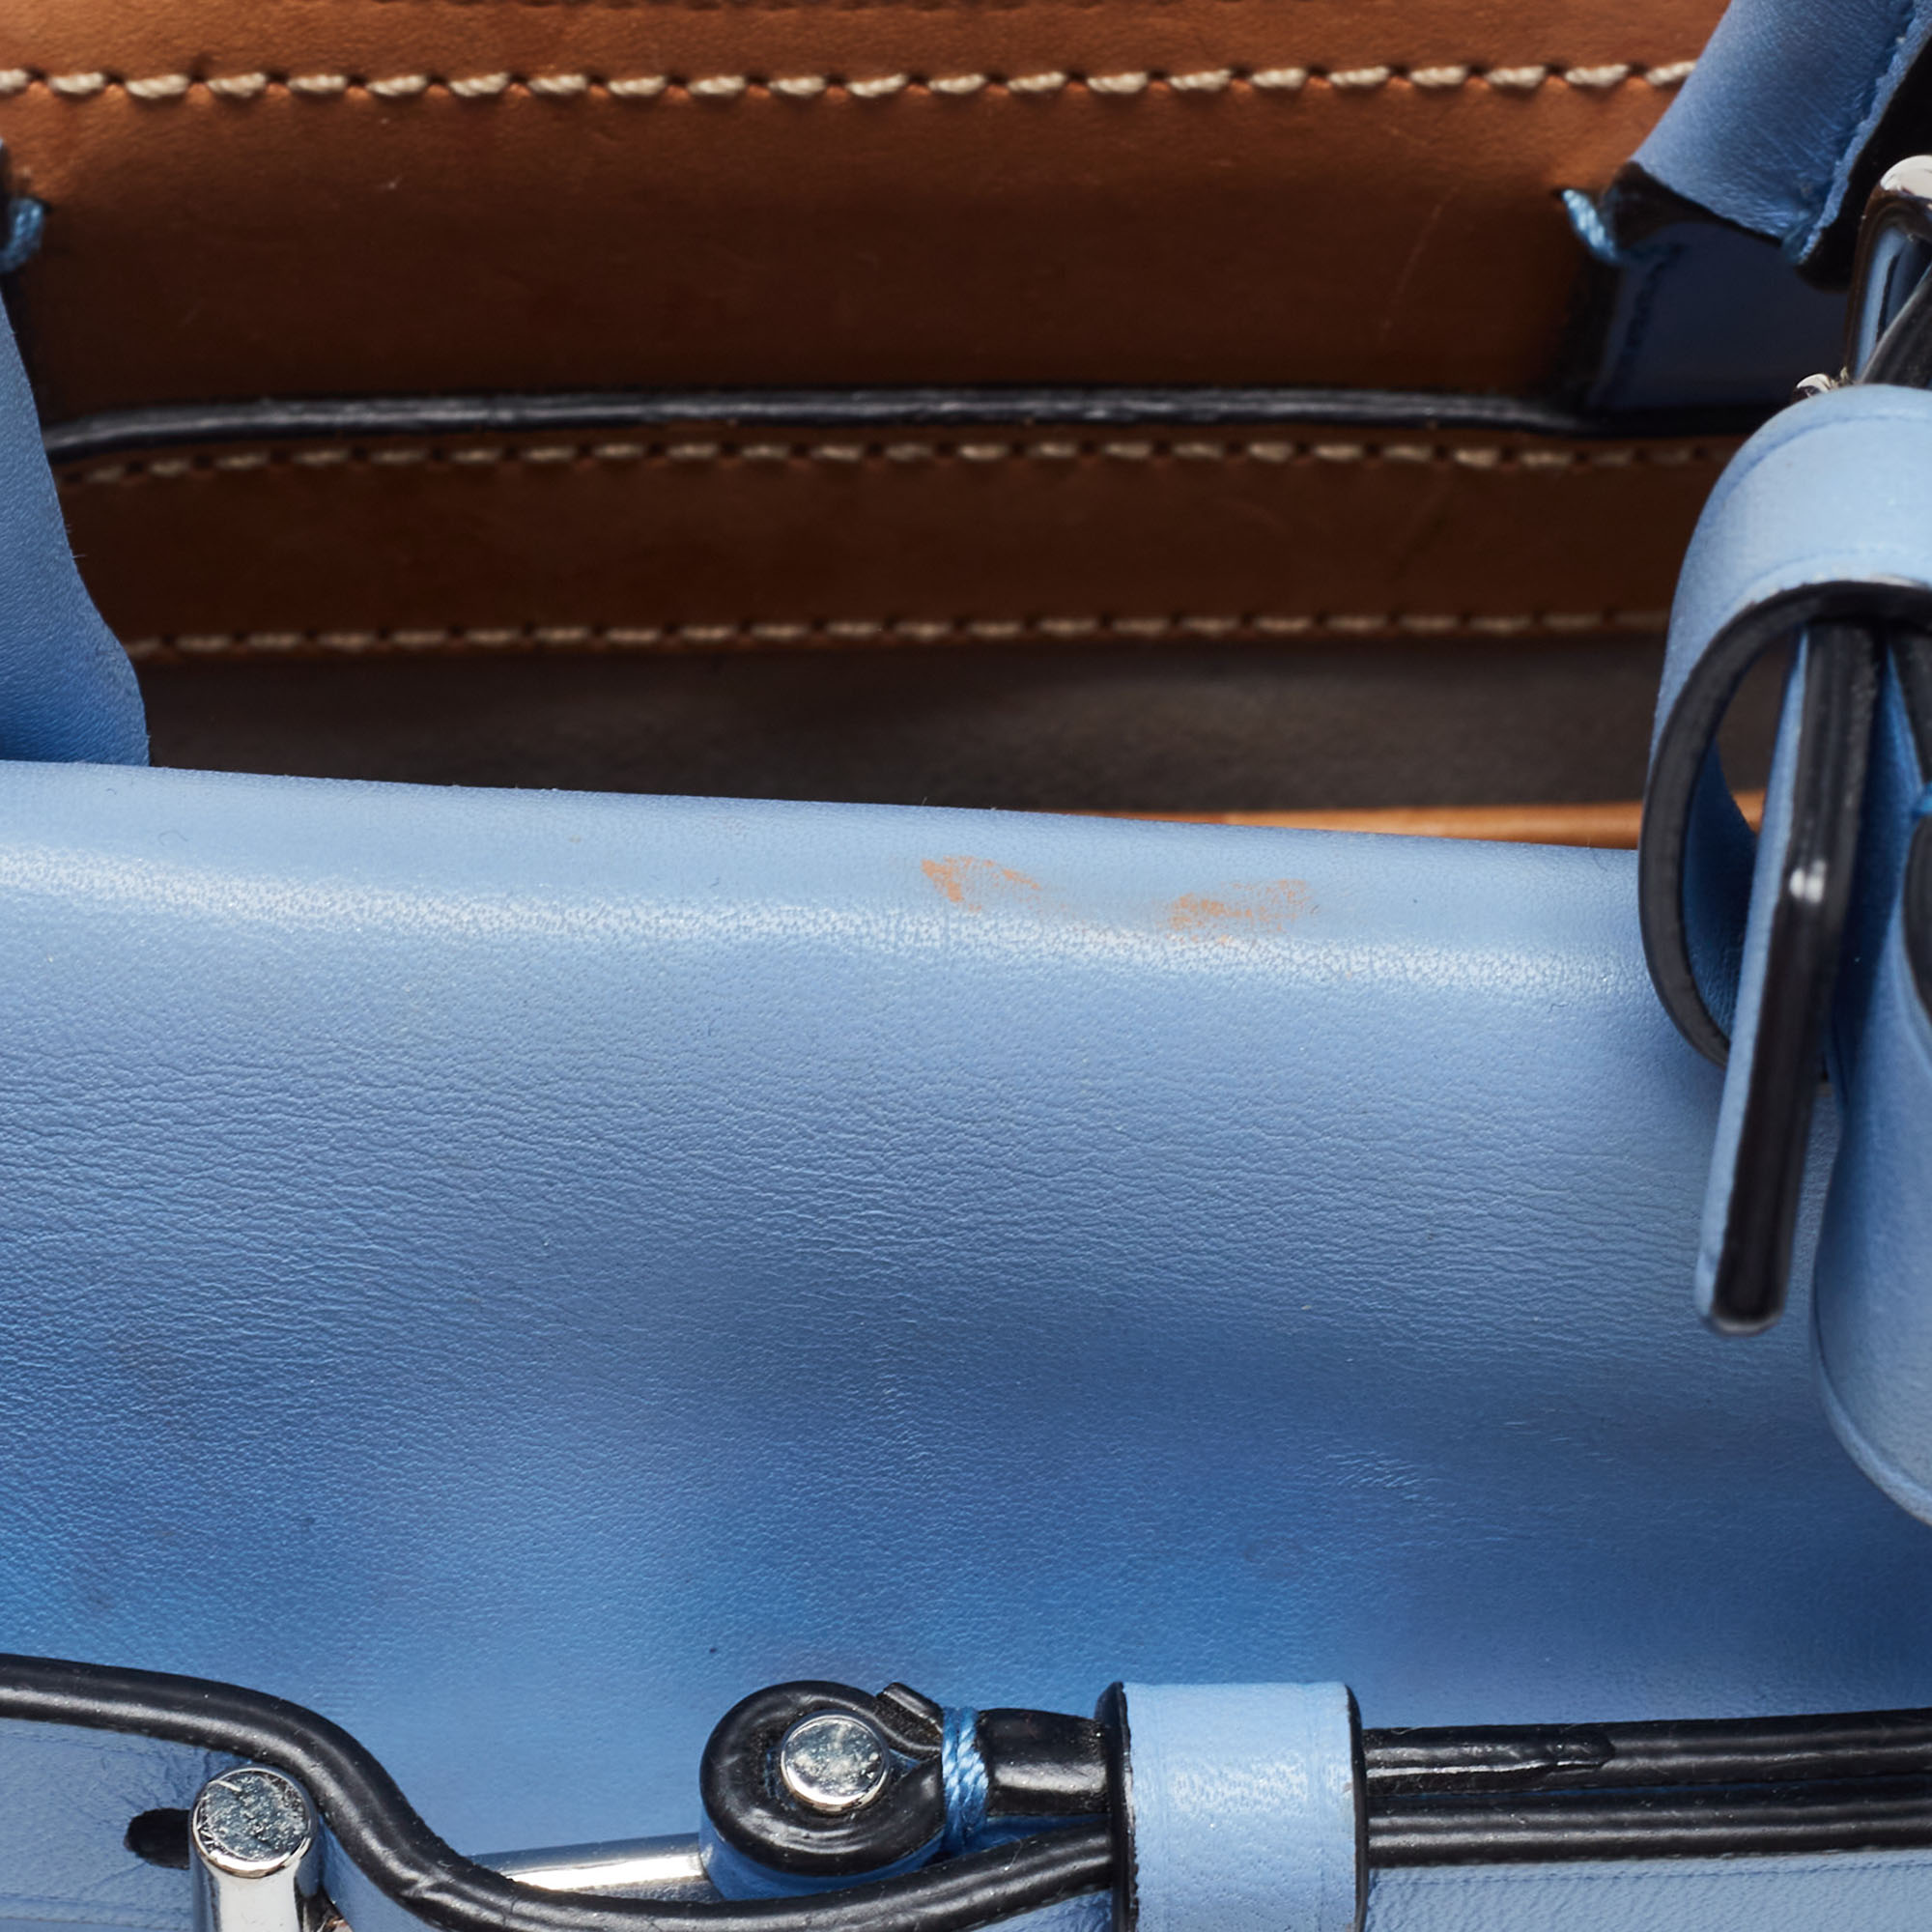 Reed Krakoff Blue Leather Micro Boxer Tote